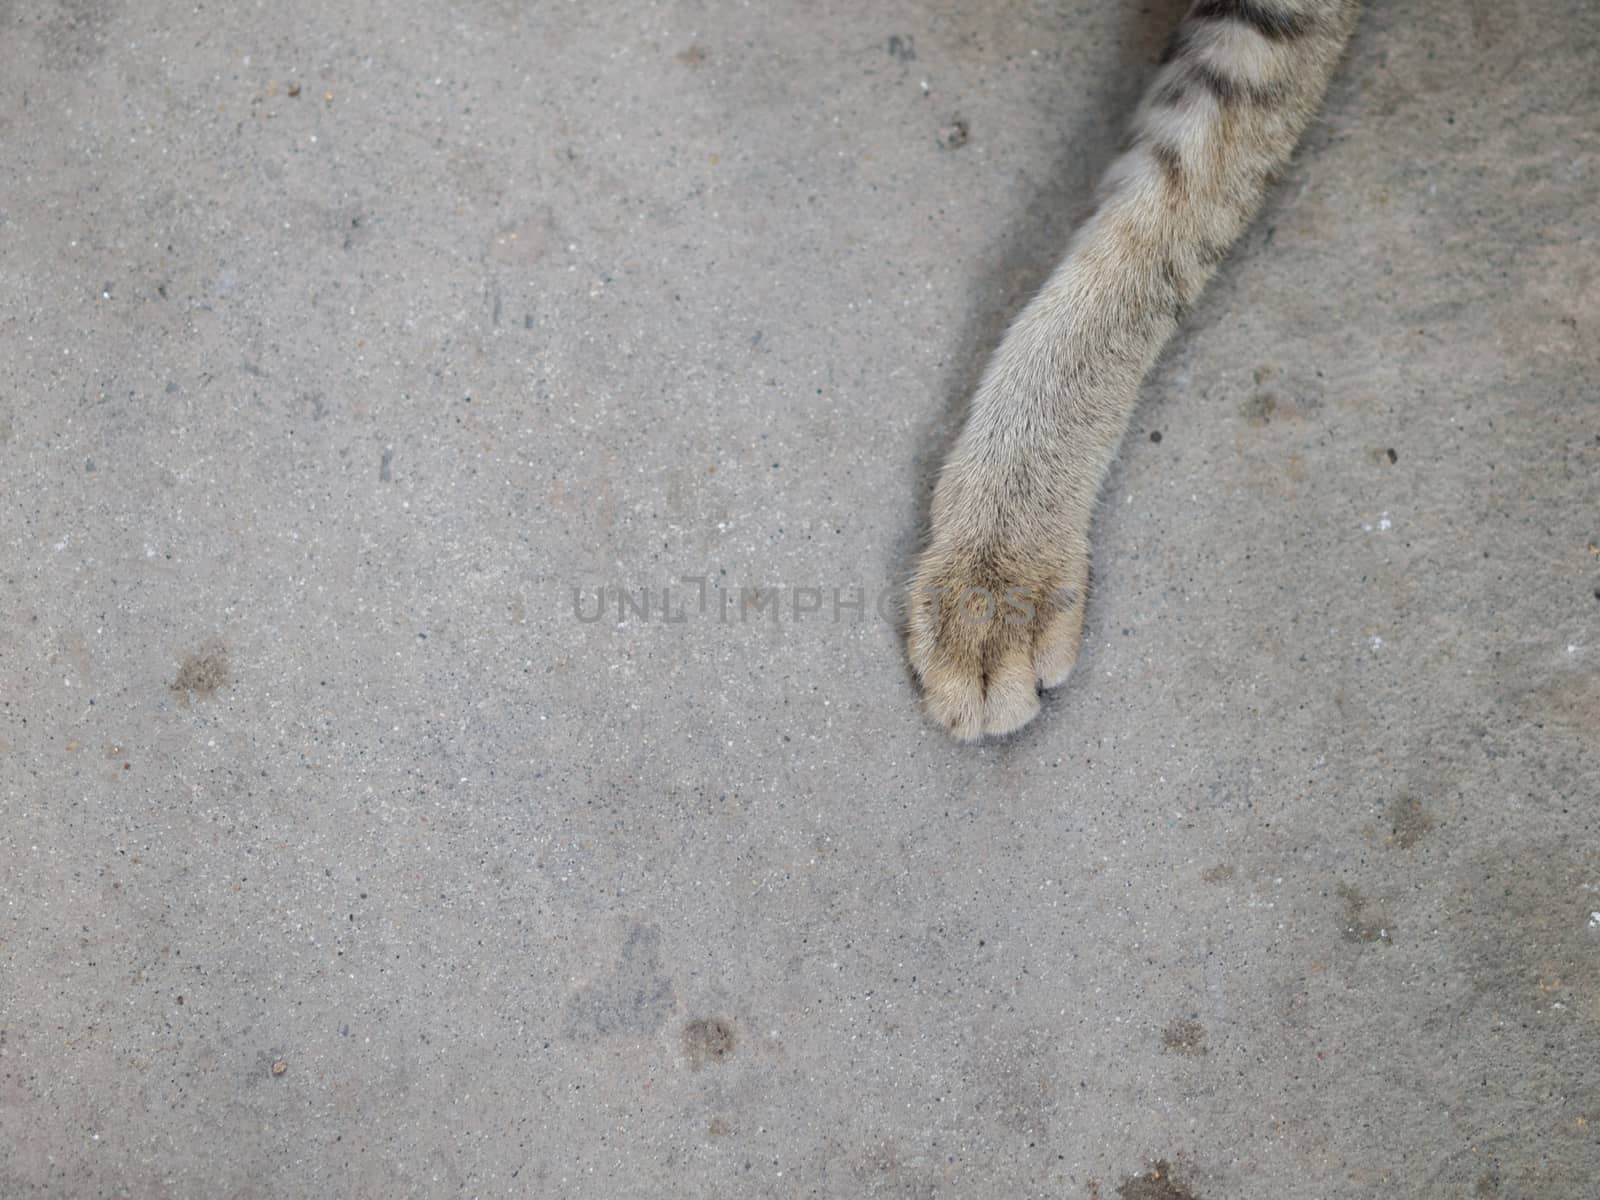 CAT'S PAW ON PLAIN CONCRETE GROUND by PrettyTG